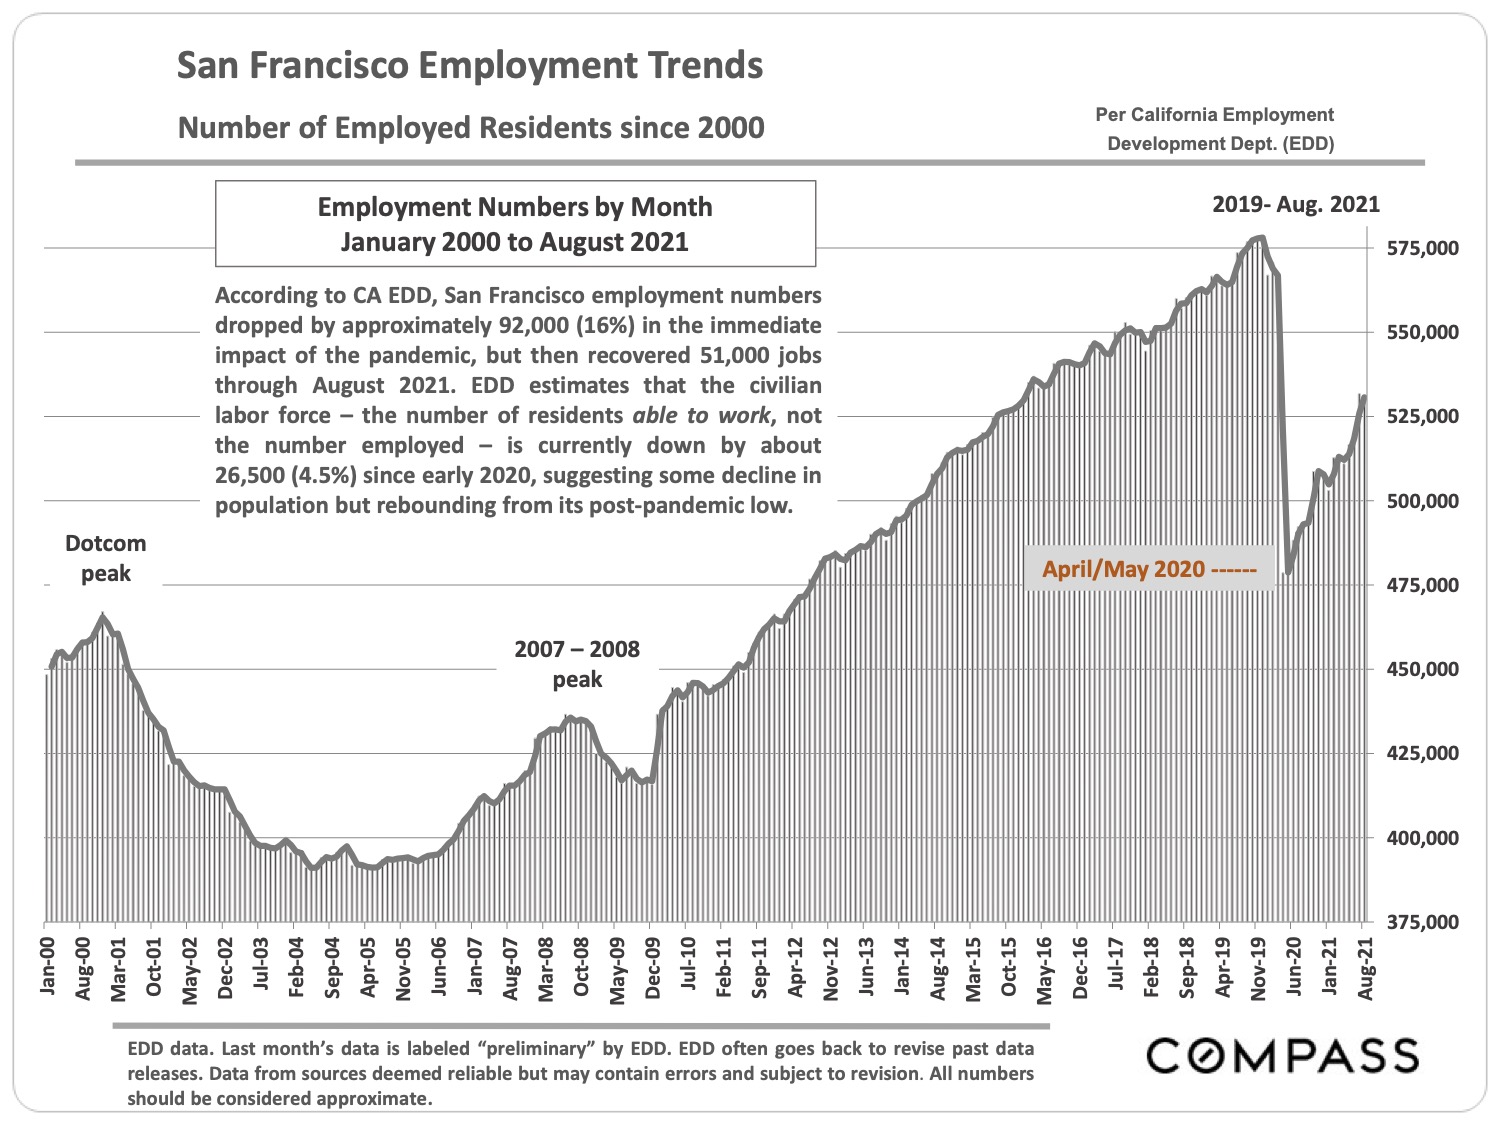 San Francisco Employment Trends - Number of Employed Residents Since 2000